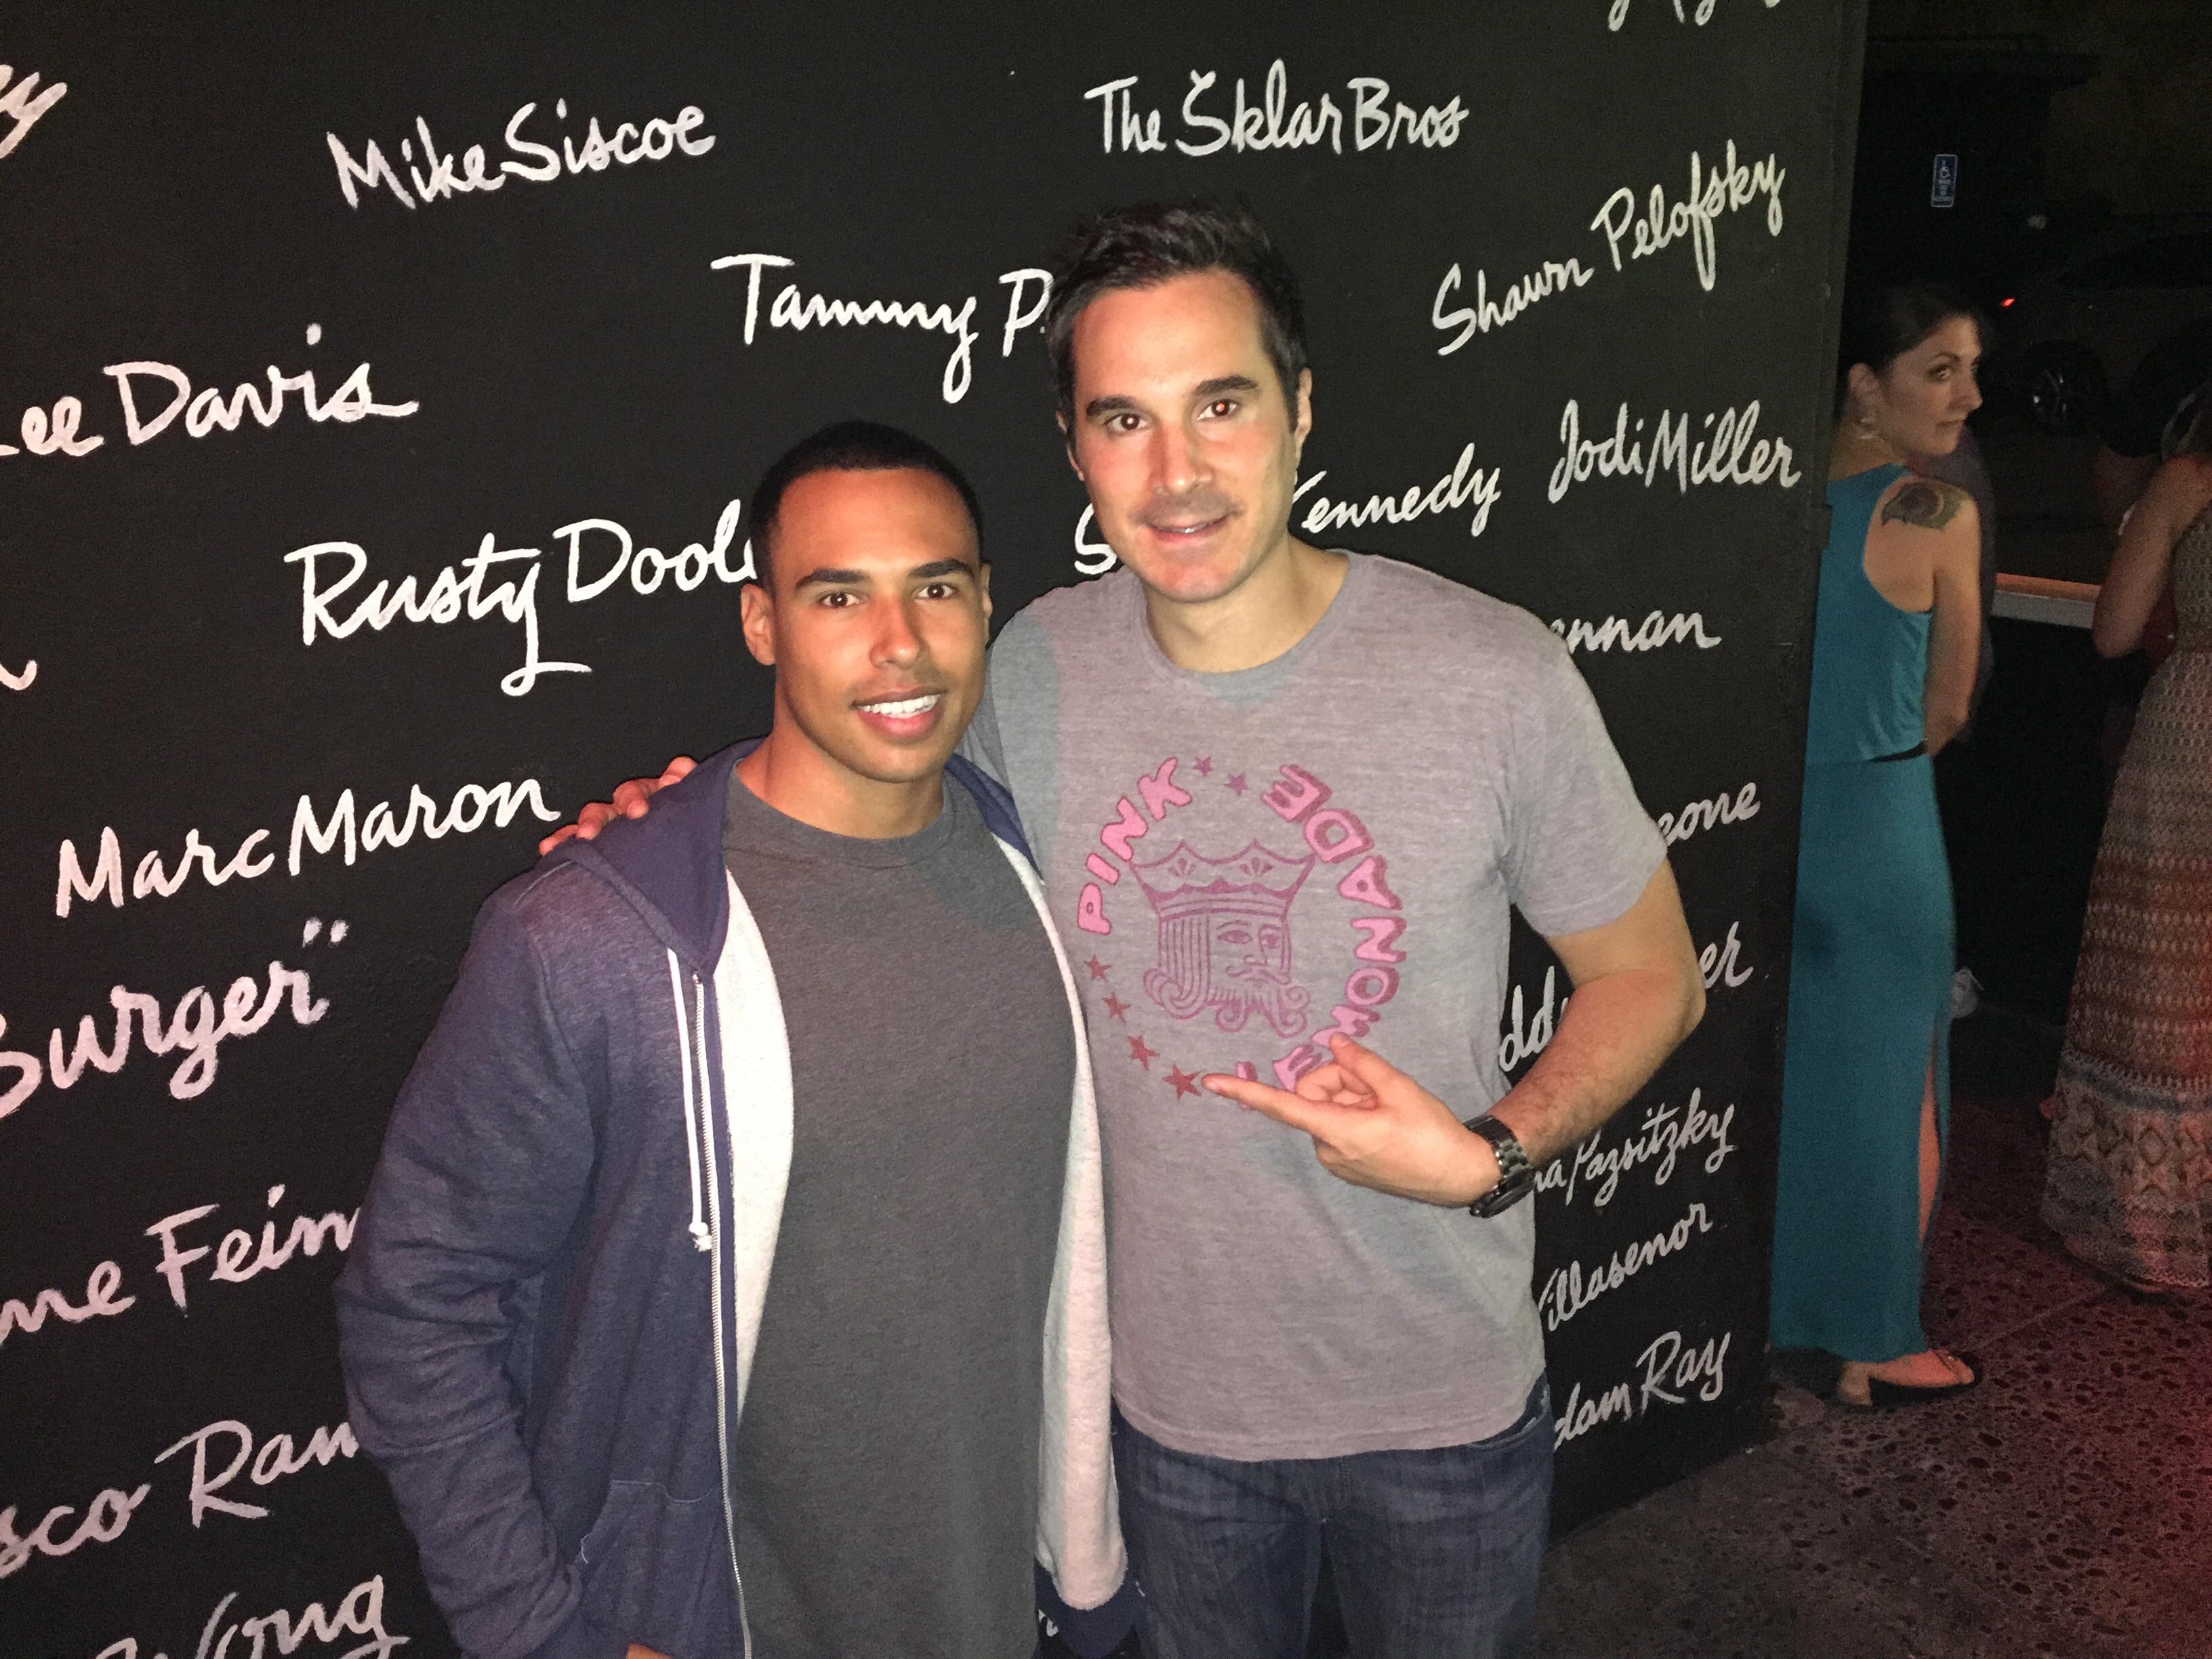 Matthew Jordan with John Campanelli after doing a set at The World Famous Comedy Store-Original Room